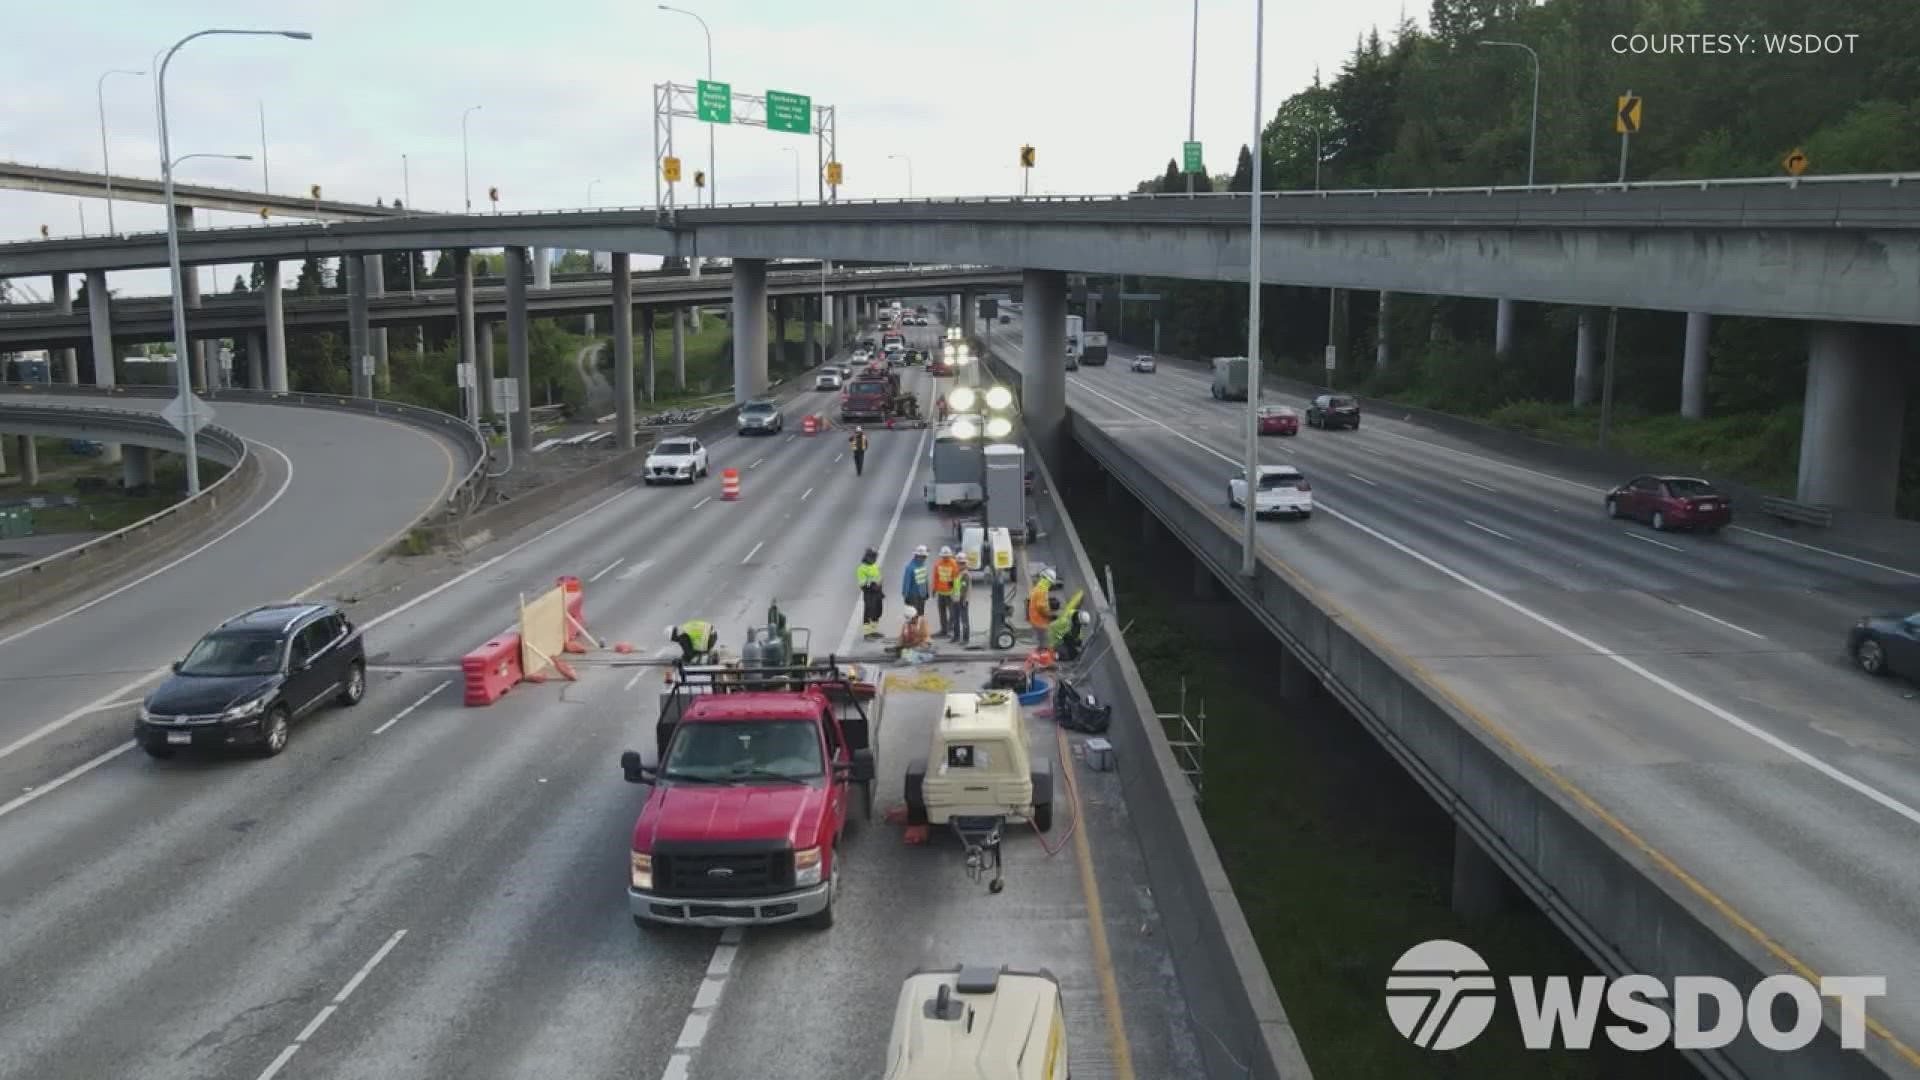 Despite all the events in Seattle, crews will once again be working on Interstate 5.